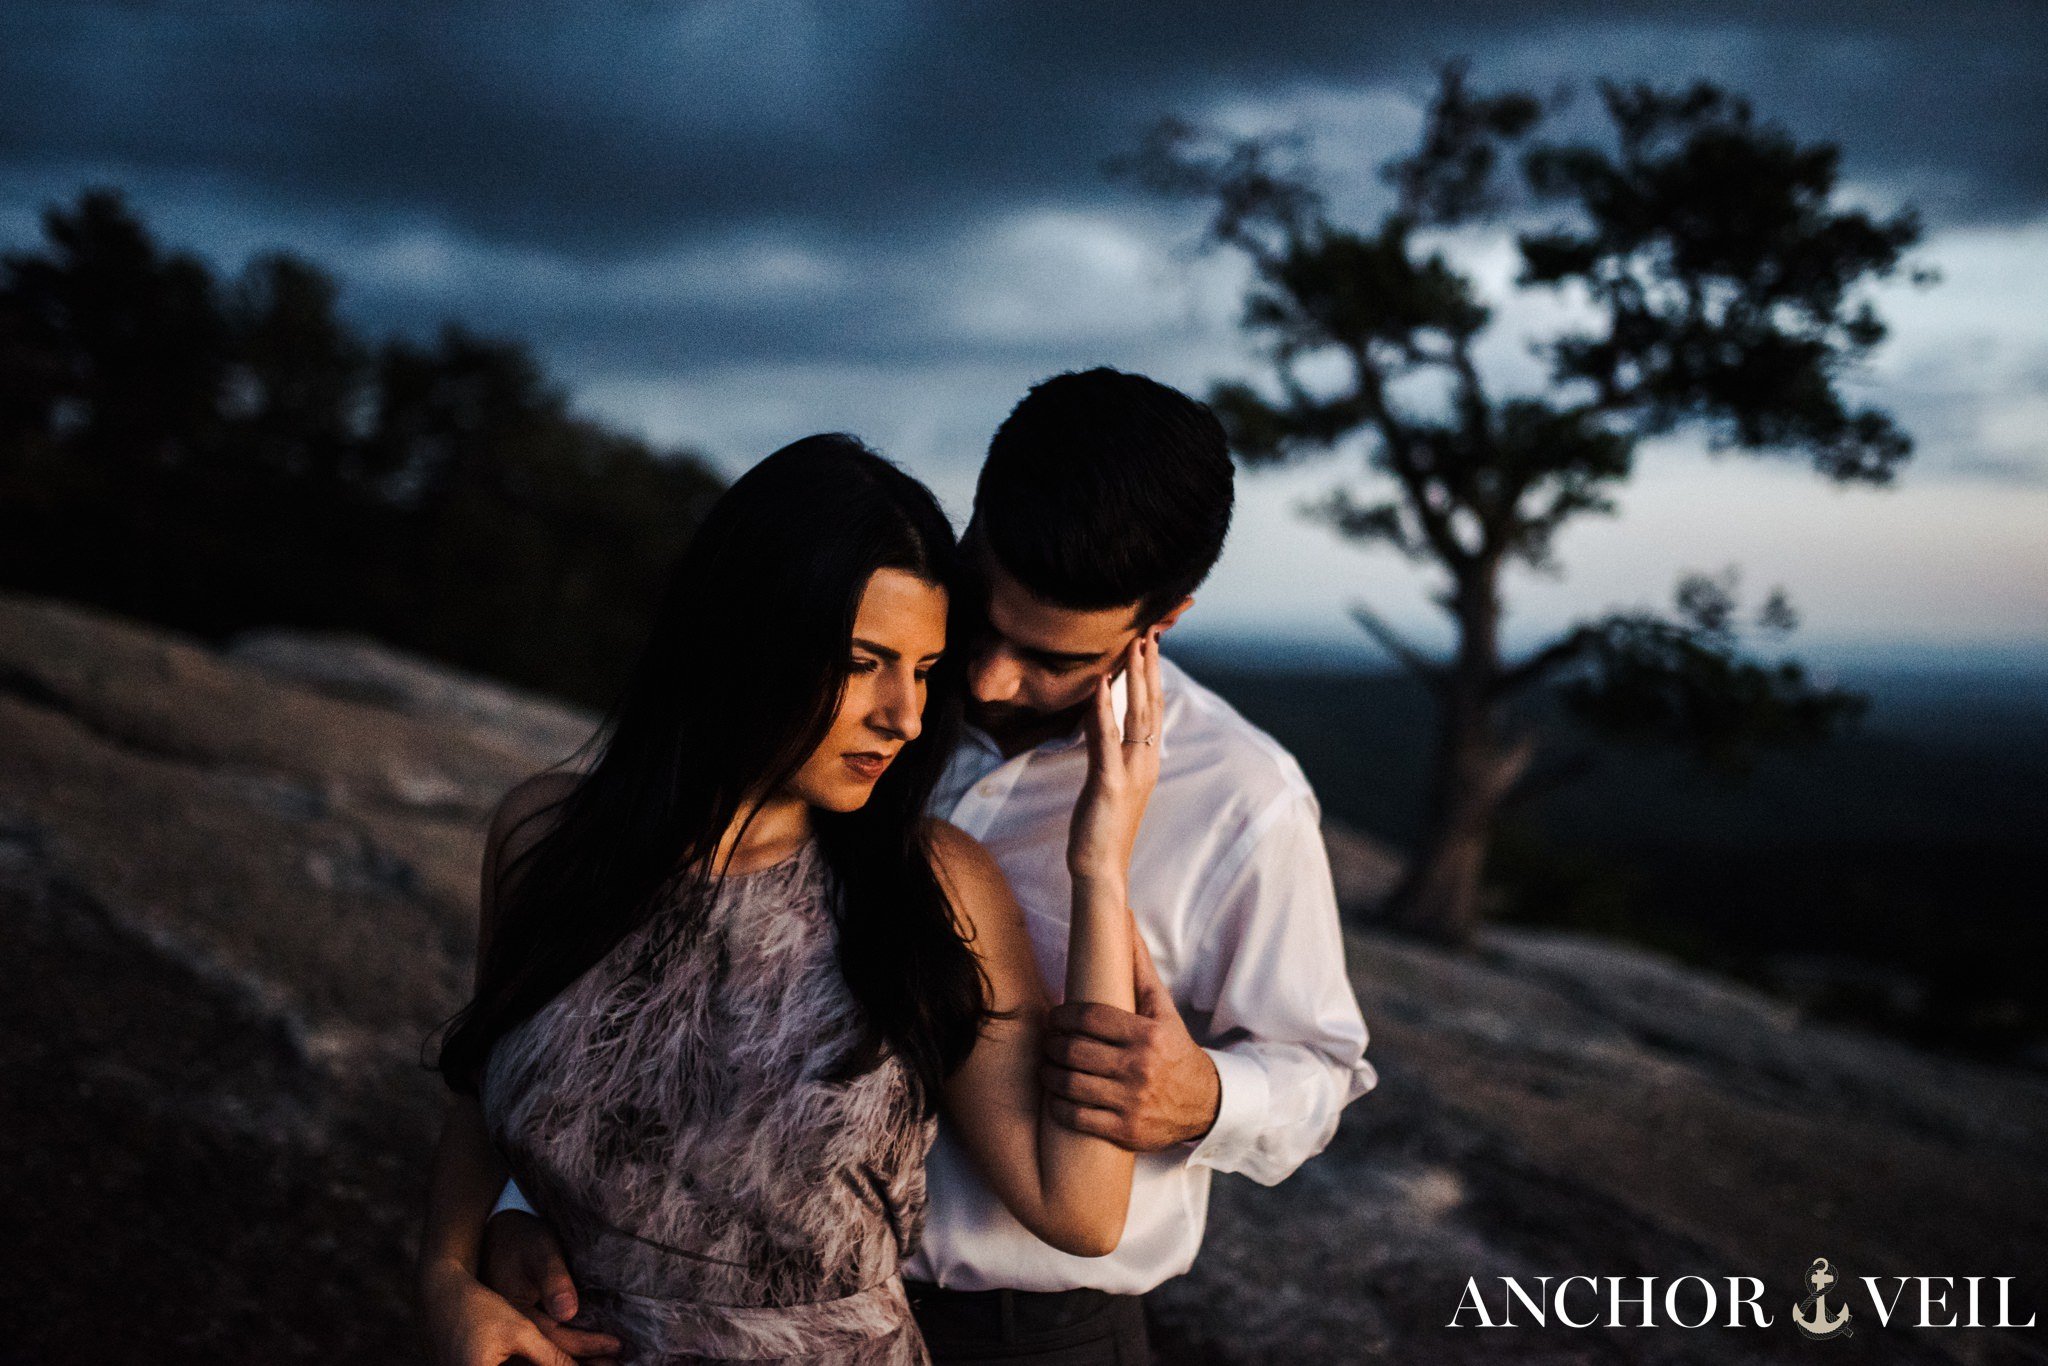 bringing his face toward hers with the light during the Stone Mountain Engagement Session